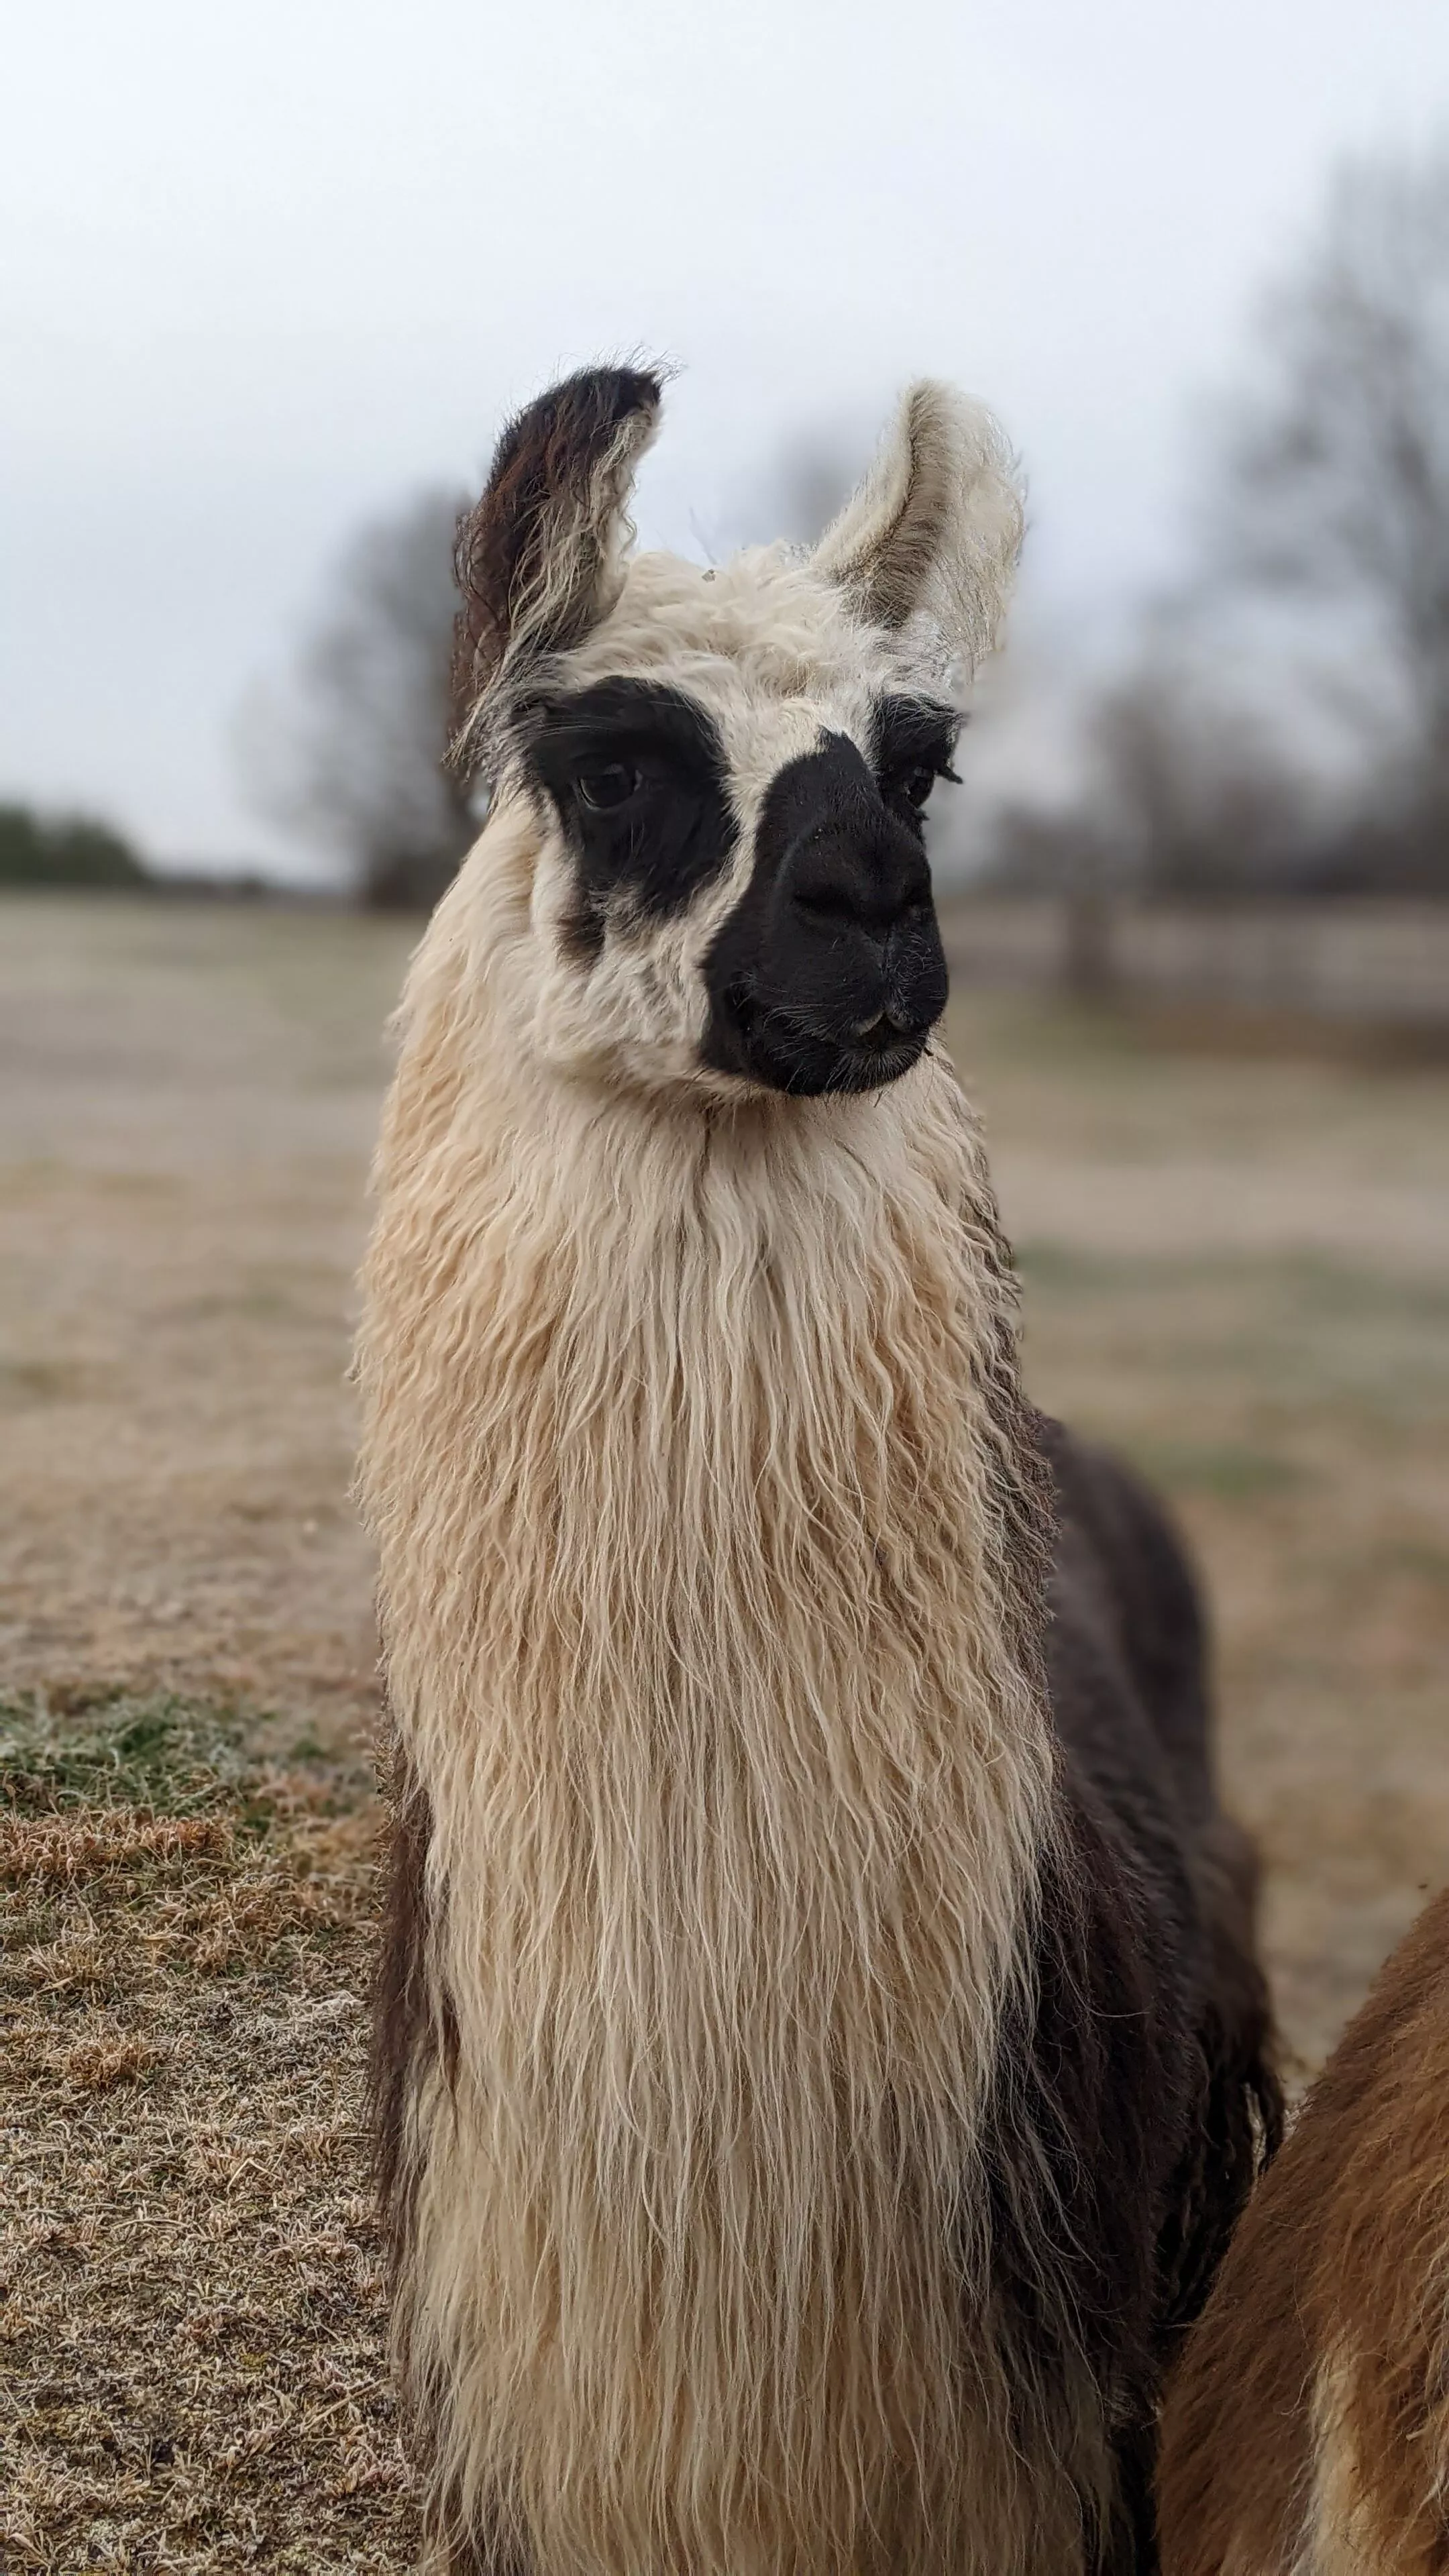 A portrait image of a llama named King